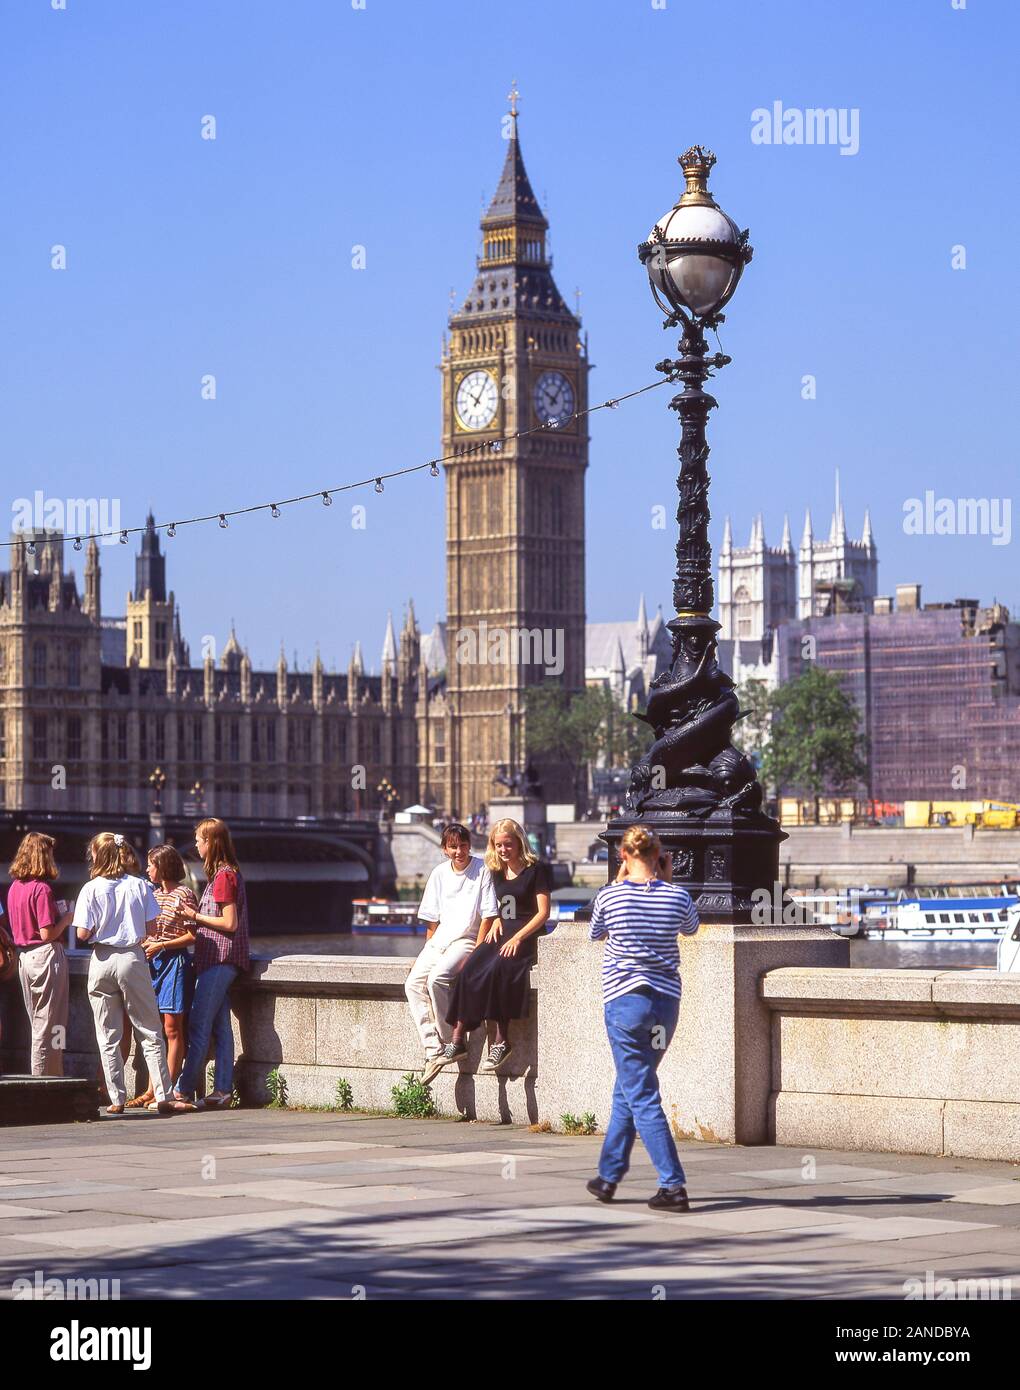 Houses of Parliament und Themse, South Bank, London Borough of Lambeth, Greater London, England, Vereinigtes Königreich Stockfoto